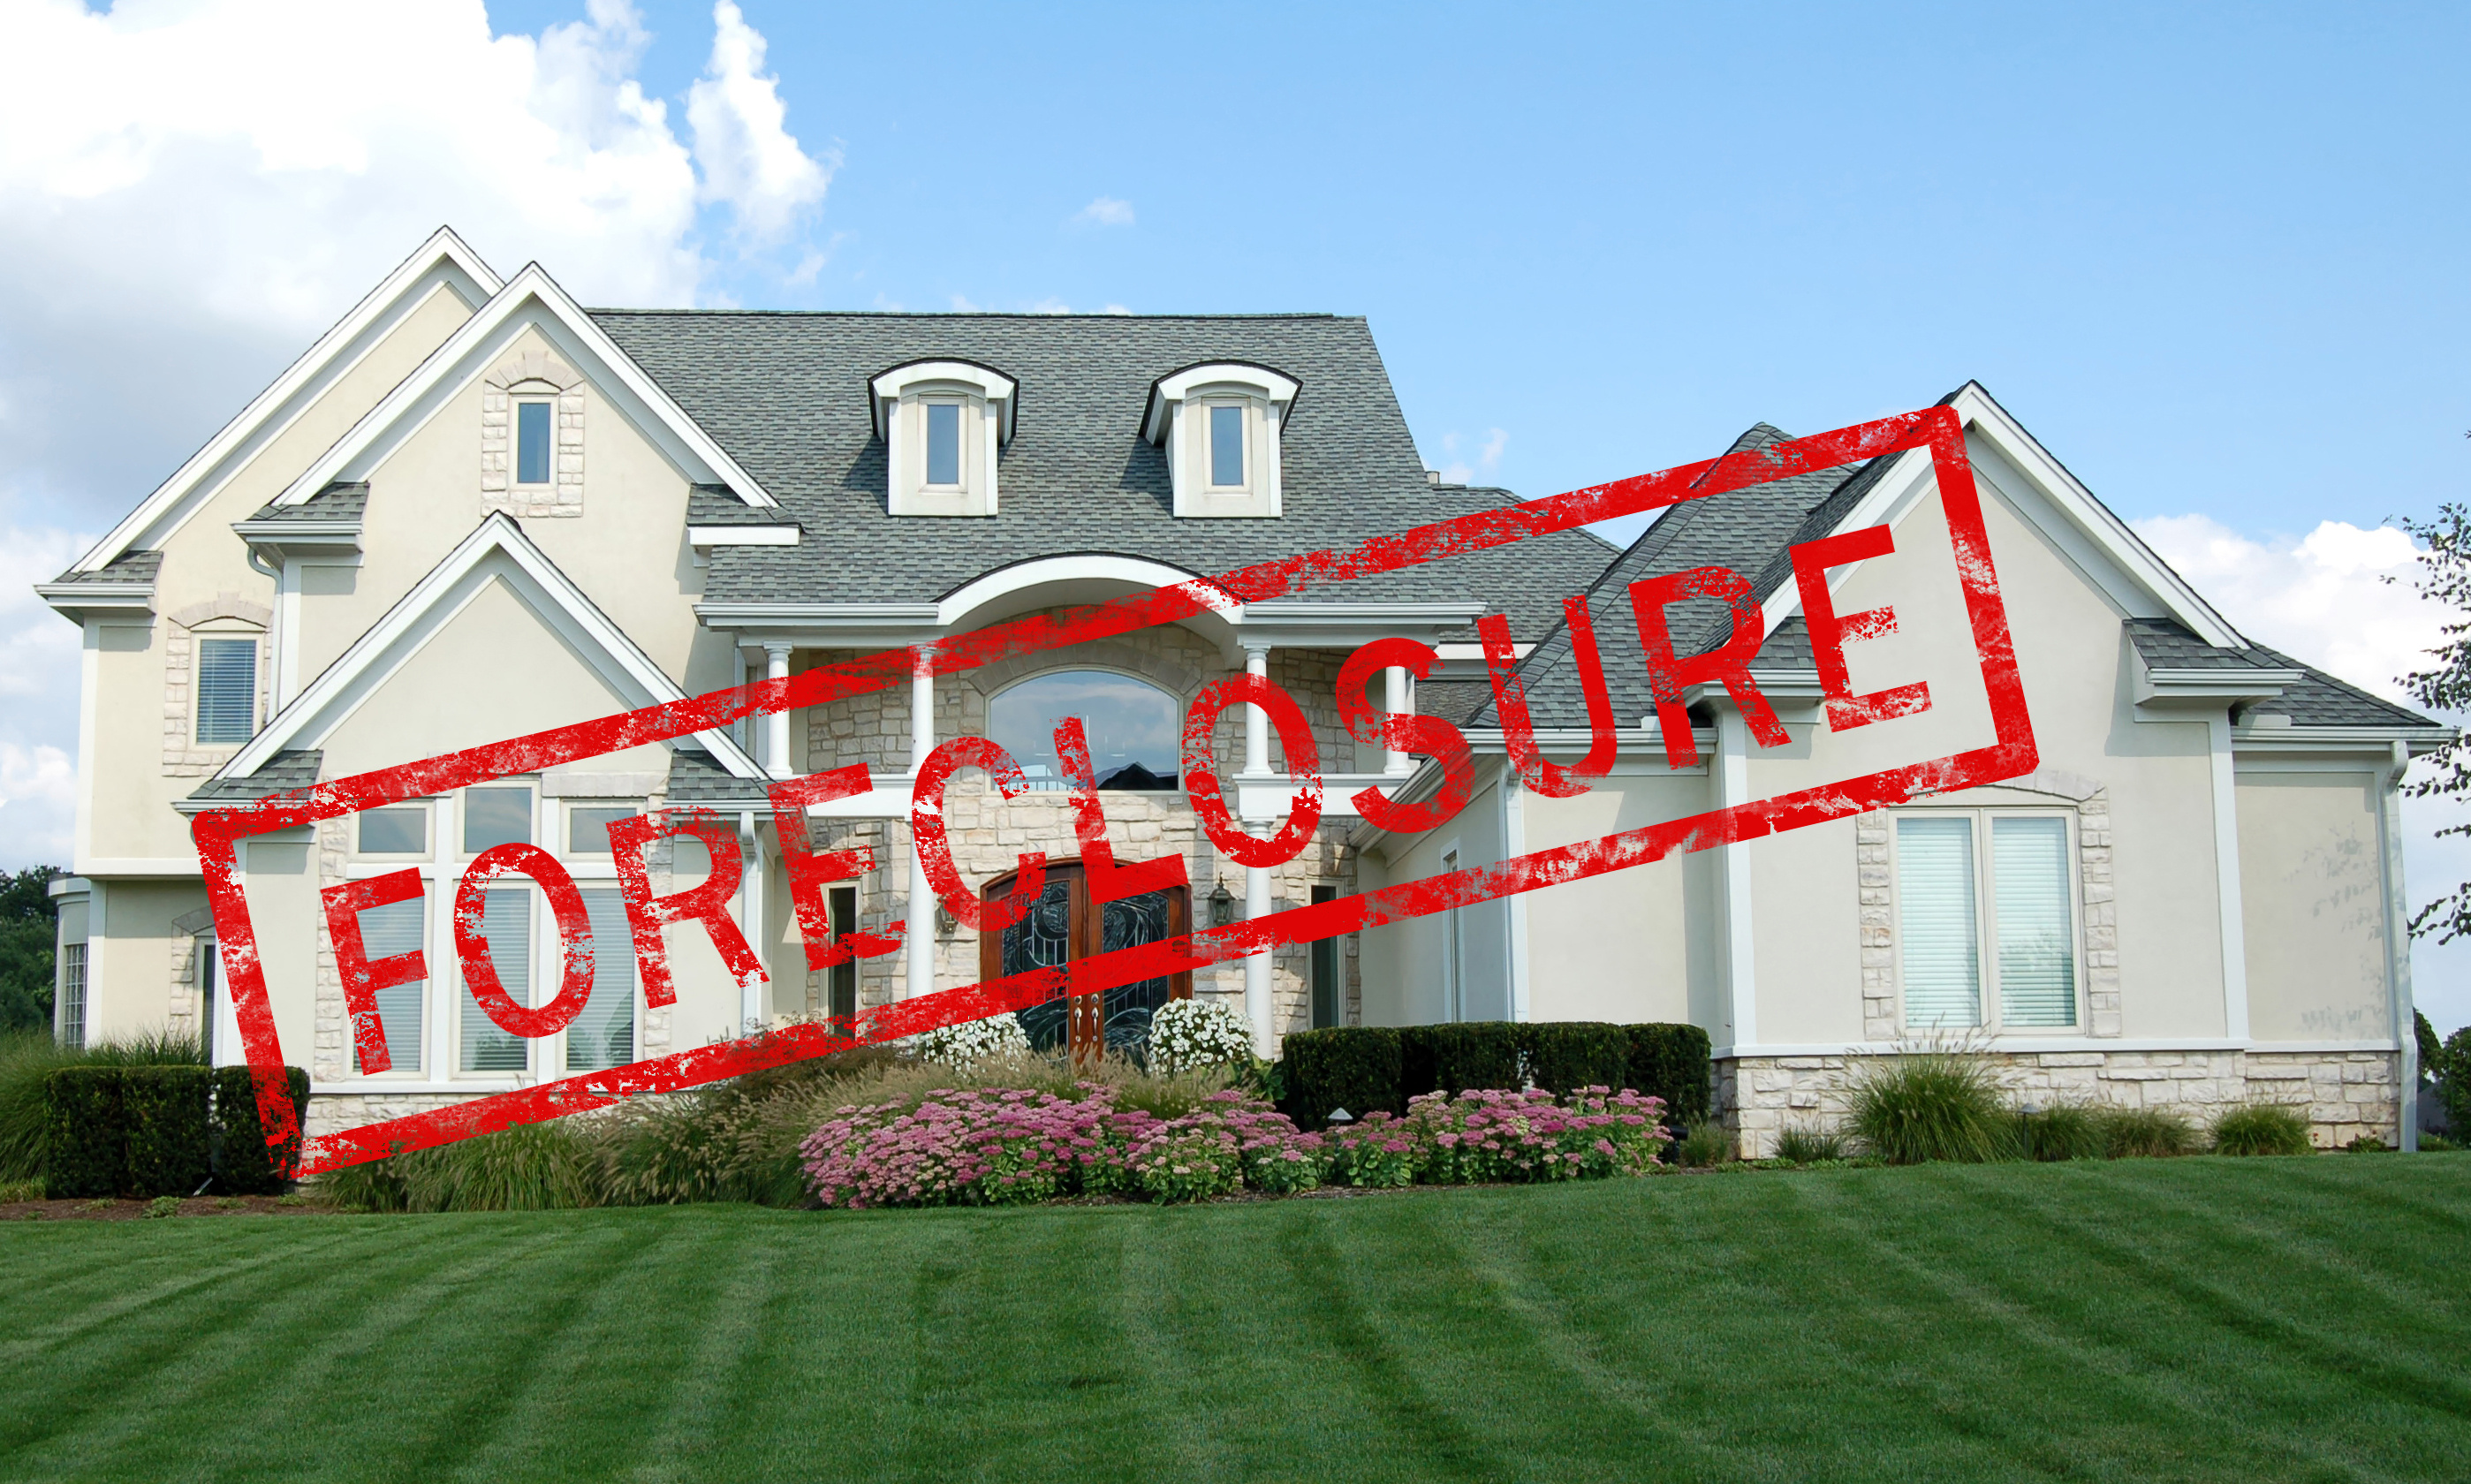 Call All Pro Appraisals to order valuations of Suffolk foreclosures